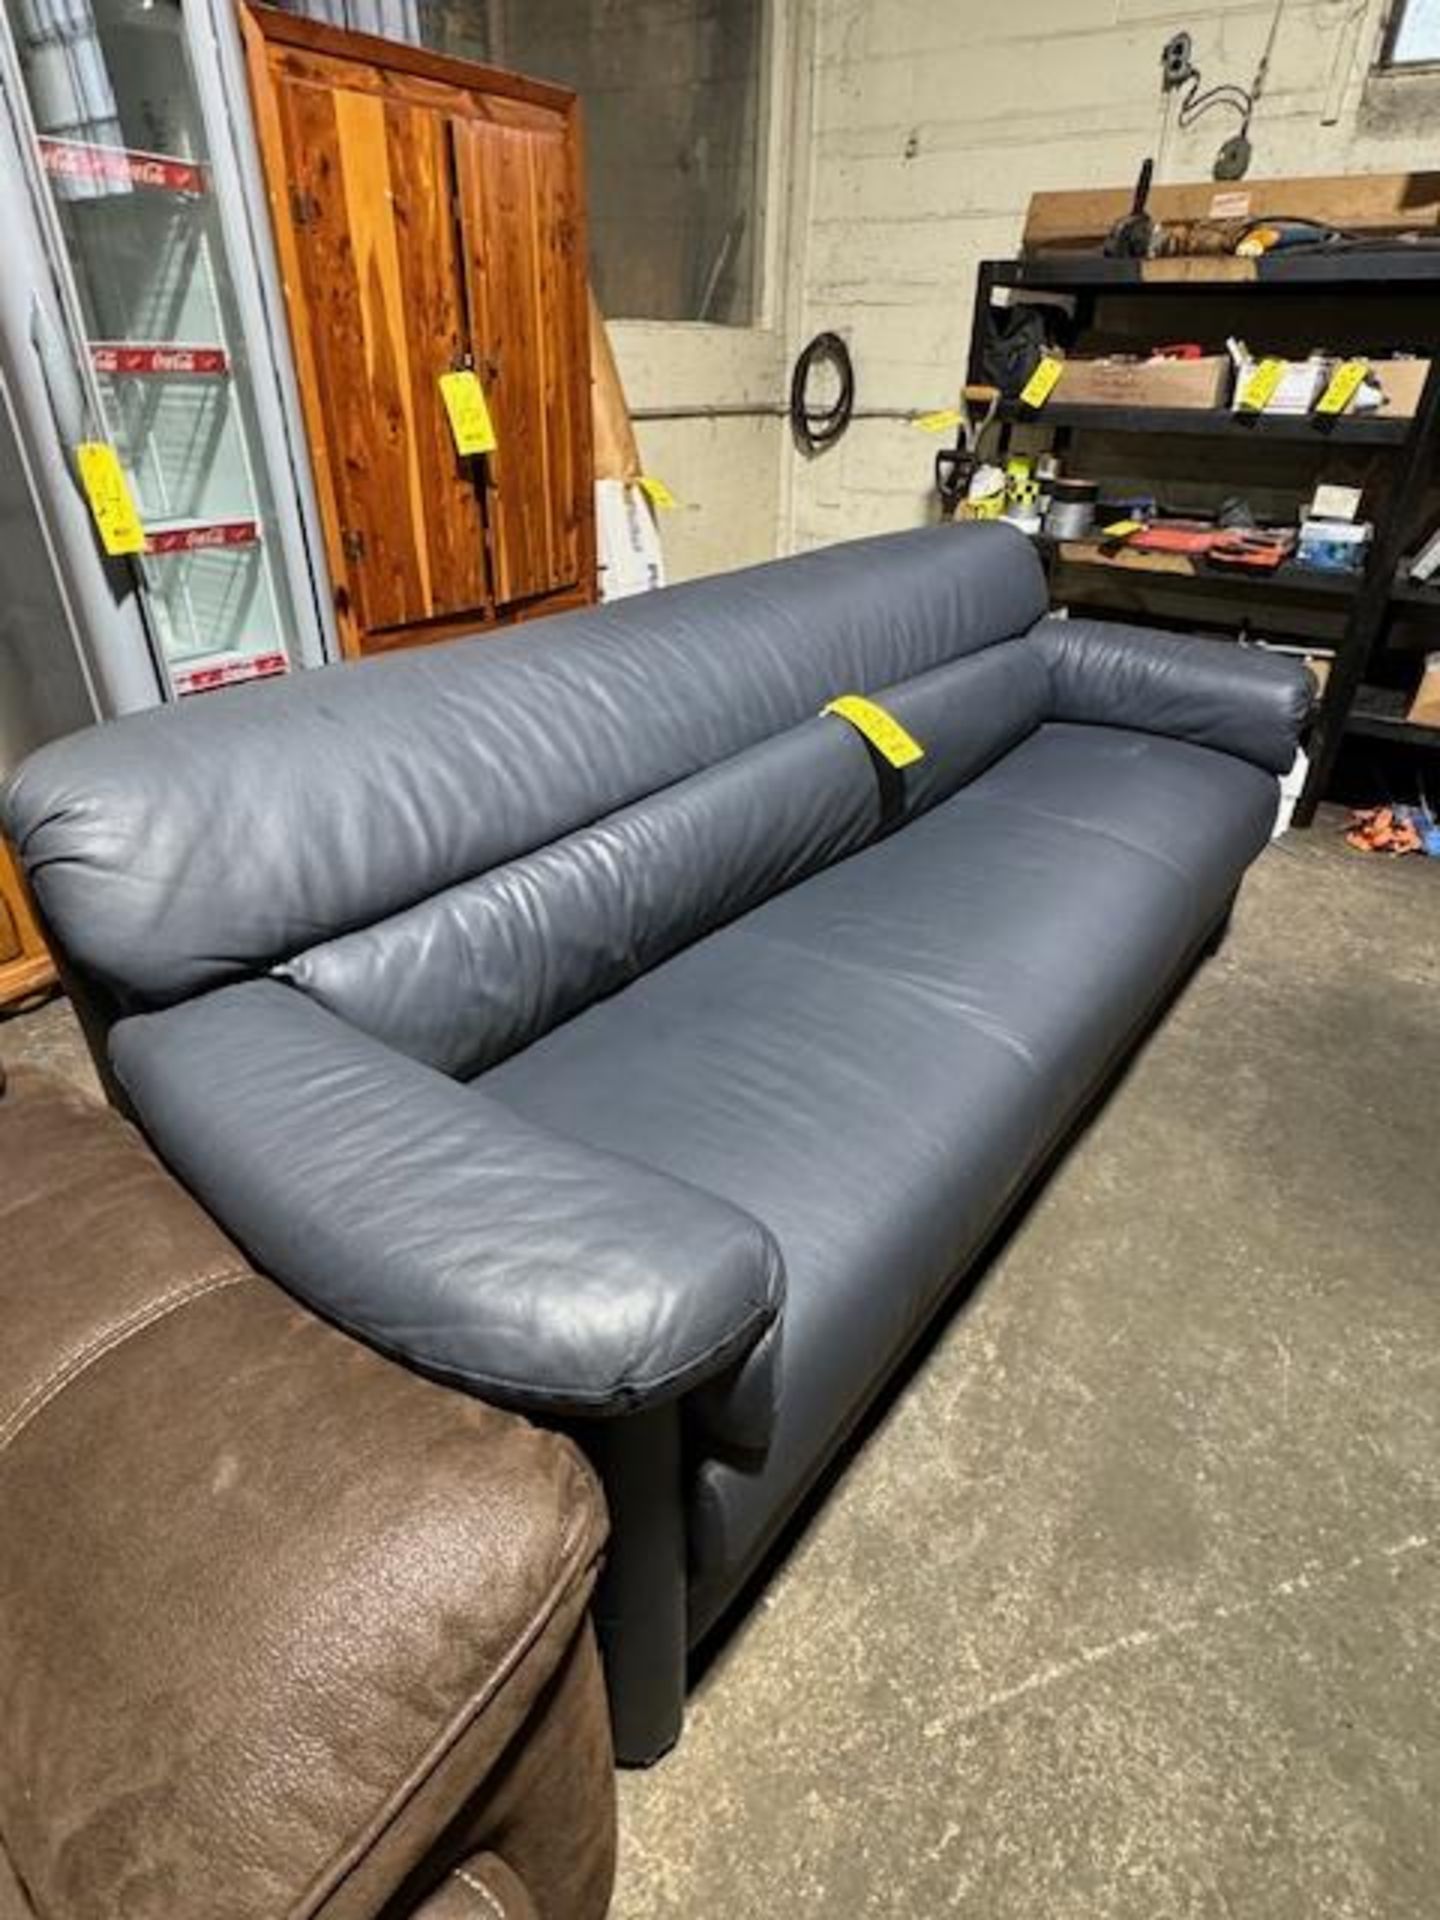 34 IN. X 88 IN. NAVY LEATHER SOFA (AS IS) (Located in Southampton, PA) - Bild 2 aus 3